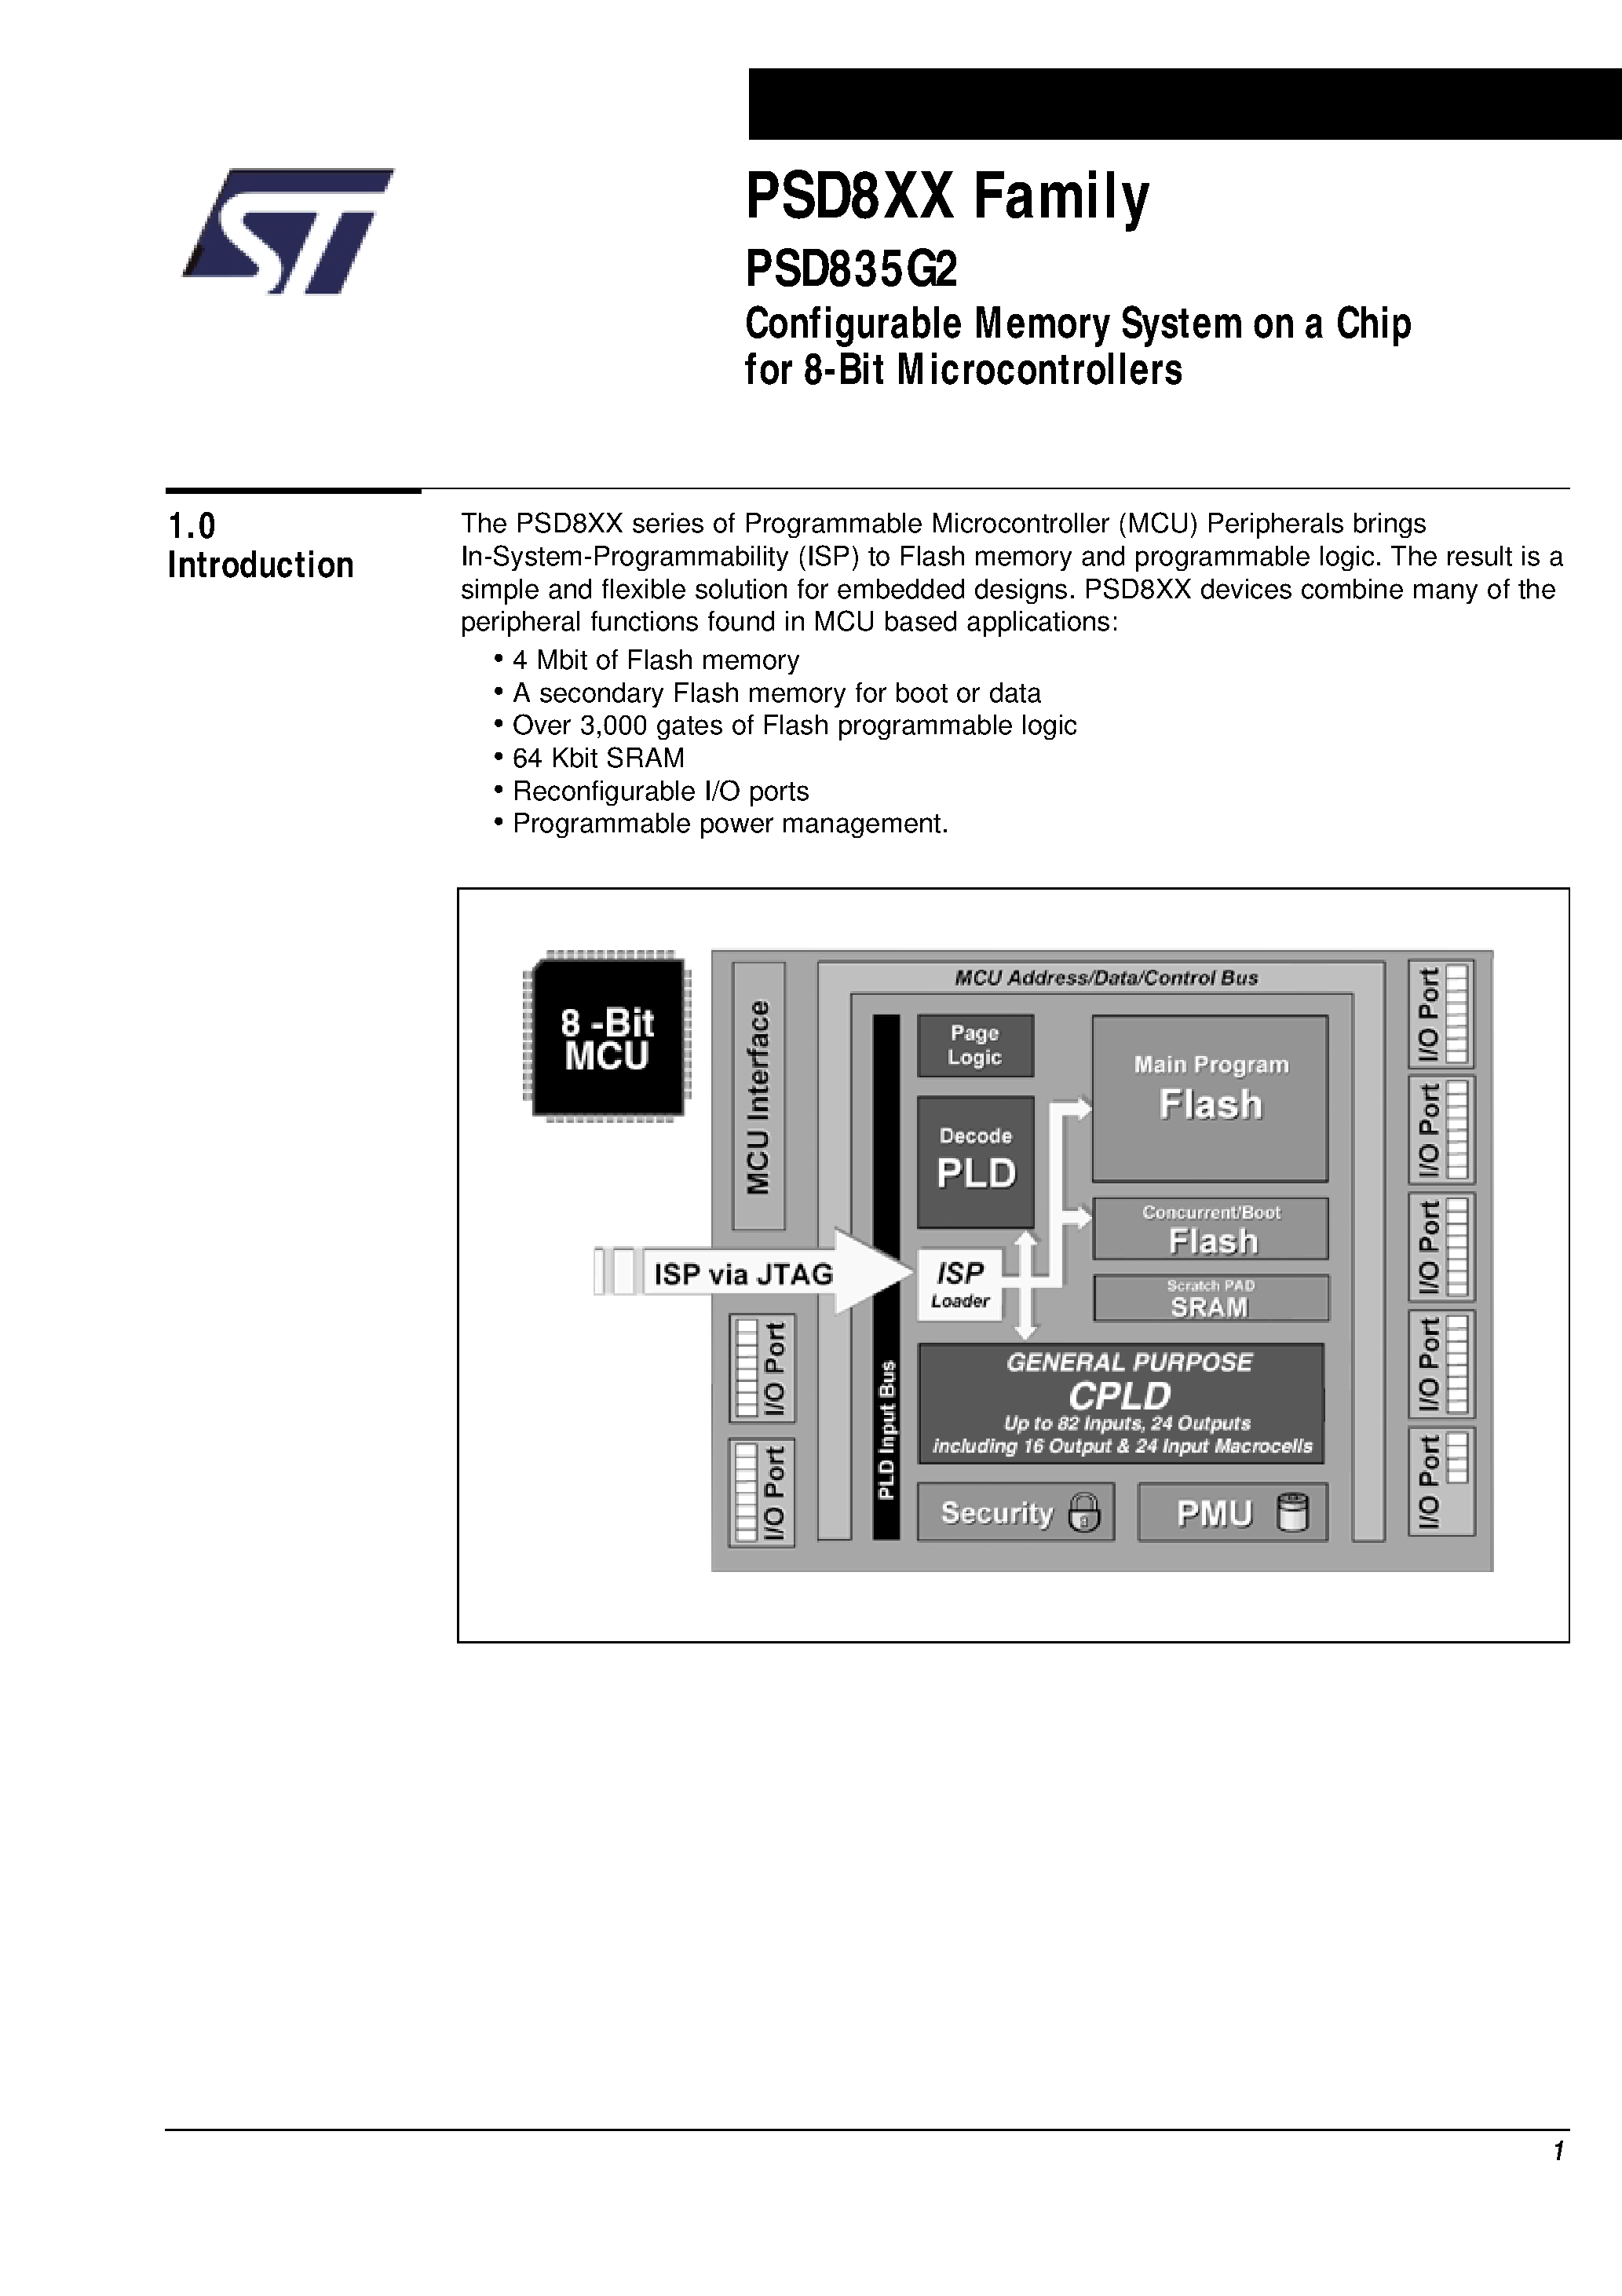 Datasheet PSD835F2-A-15B81I - Configurable Memory System on a Chip for 8-Bit Microcontrollers page 2